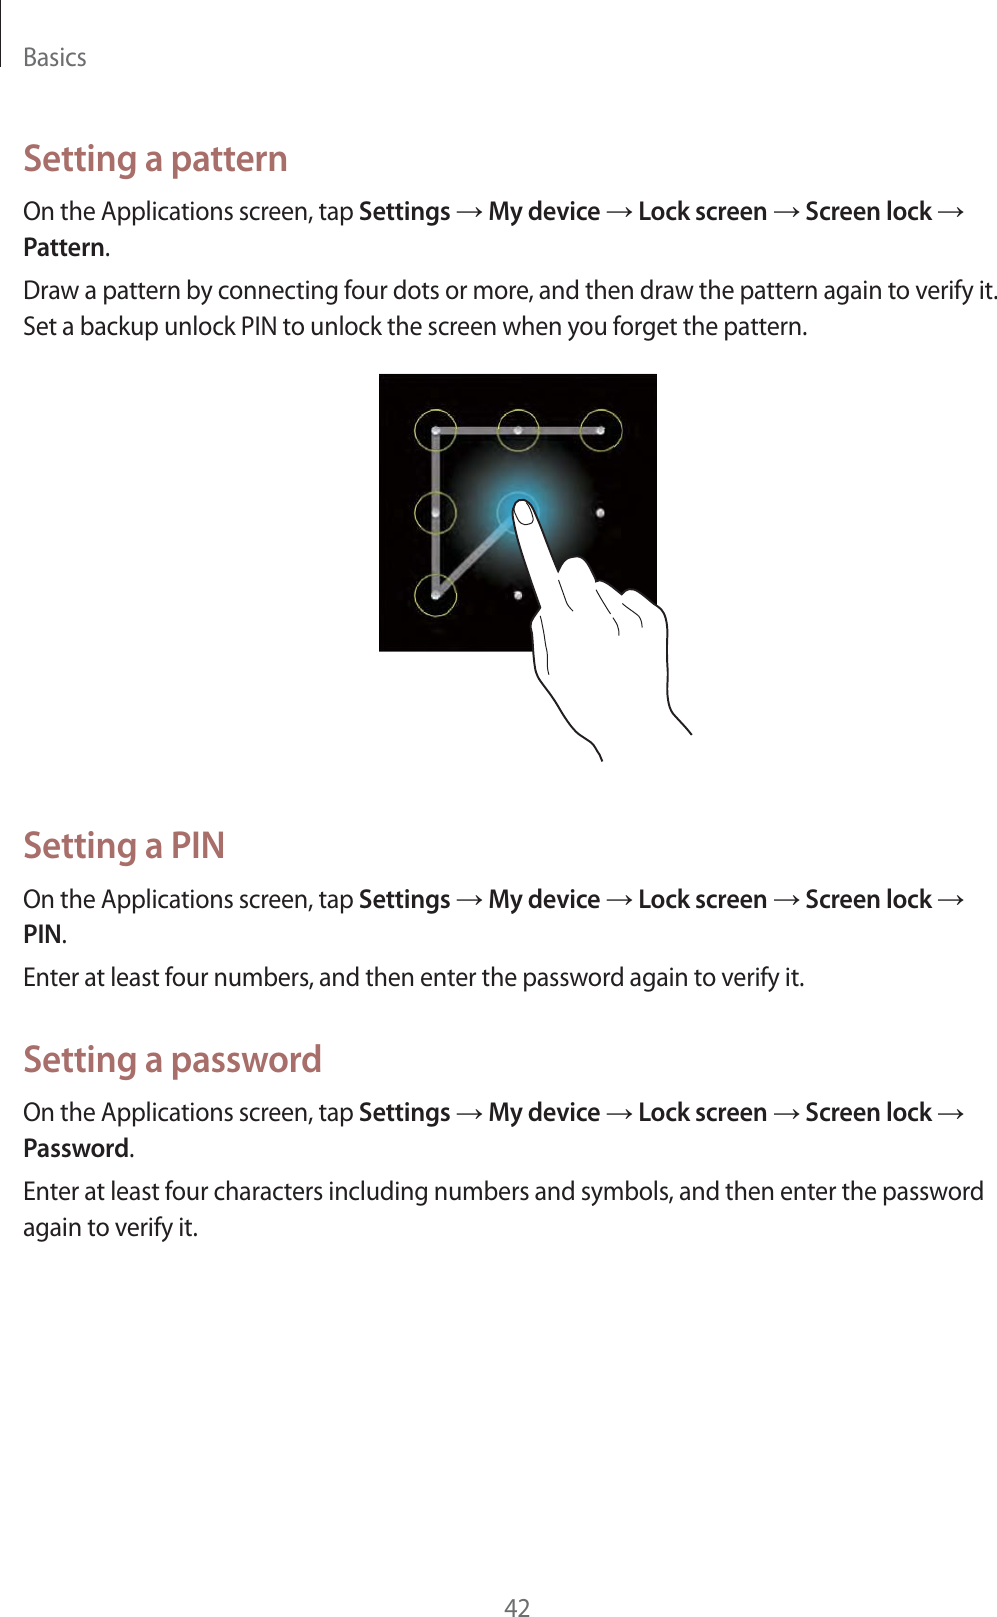 Basics42Setting a patternOn the Applications screen, tap Settings  My device  Lock screen  Screen lock  Pattern.Draw a pattern by connecting four dots or more, and then draw the pattern again to verify it. Set a backup unlock PIN to unlock the screen when you forget the pattern.Setting a PINOn the Applications screen, tap Settings  My device  Lock screen  Screen lock  PIN.Enter at least four numbers, and then enter the password again to verify it.Setting a passwordOn the Applications screen, tap Settings  My device  Lock screen  Screen lock  Password.Enter at least four characters including numbers and symbols, and then enter the password again to verify it.